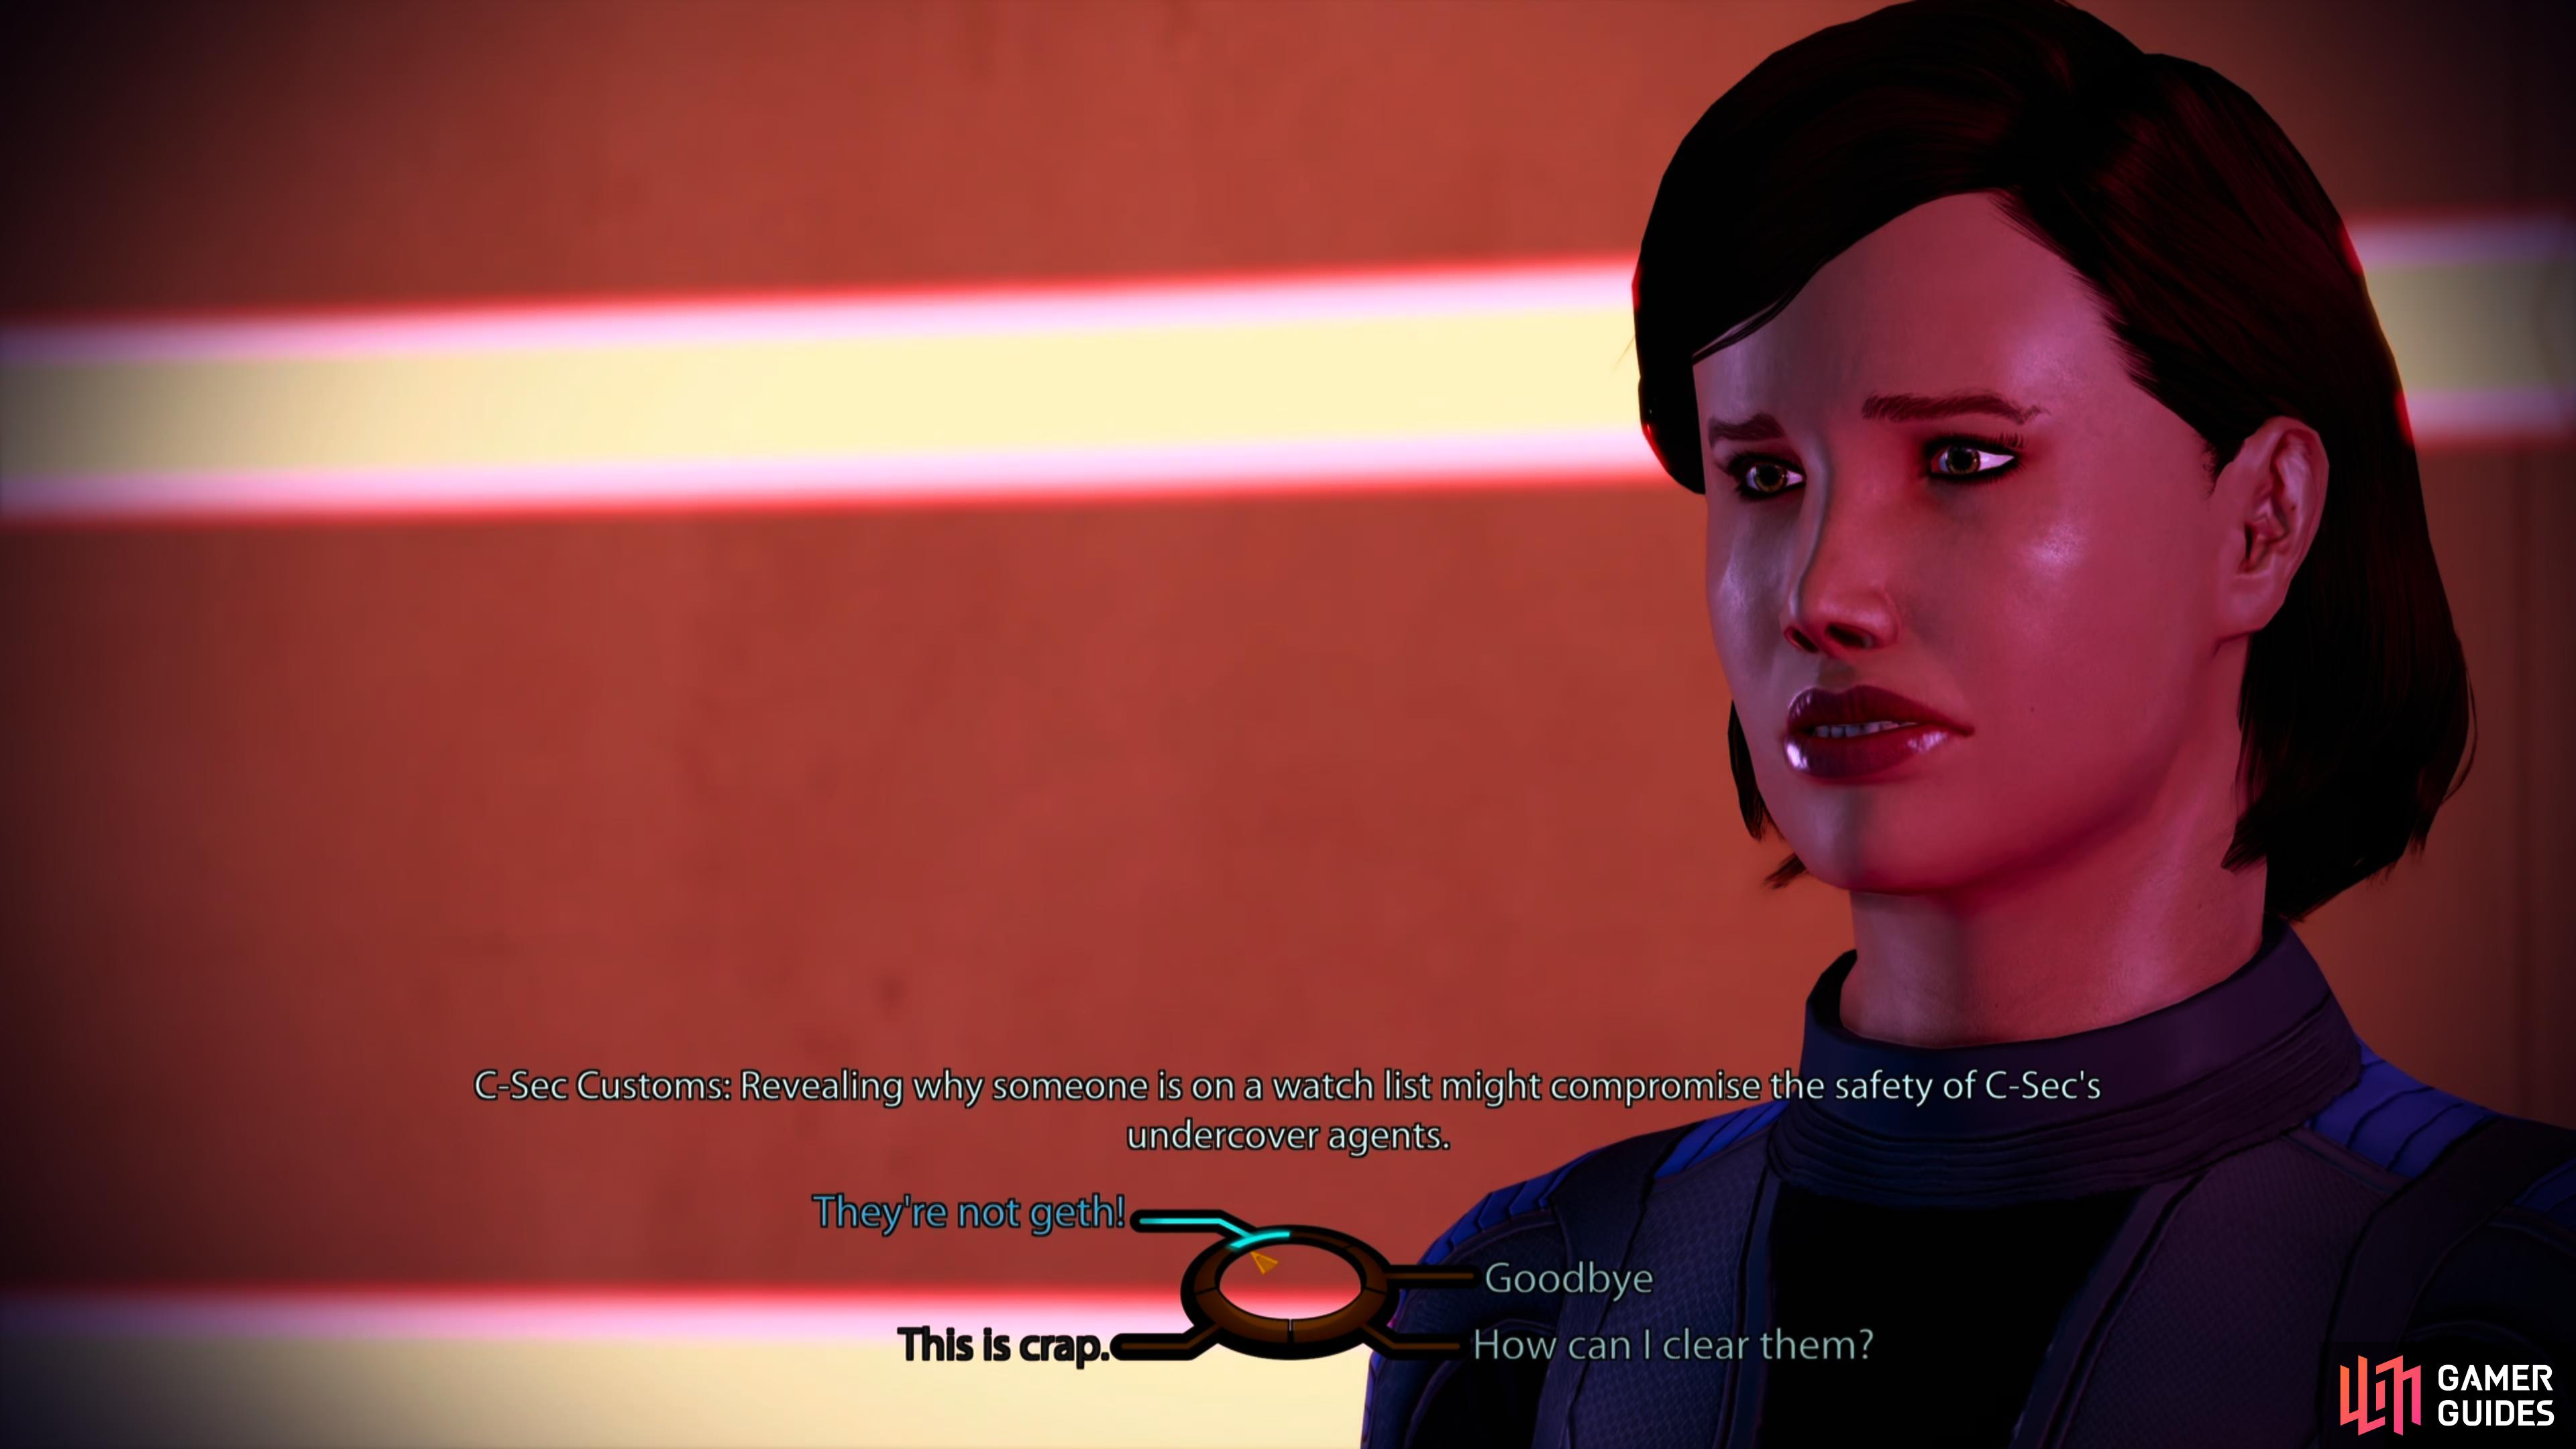 Either give her the Fake IDs found during Garrus's loyalty mission, or pass a Paragon/Renegade check while talking to a C-Sec Customs officer.